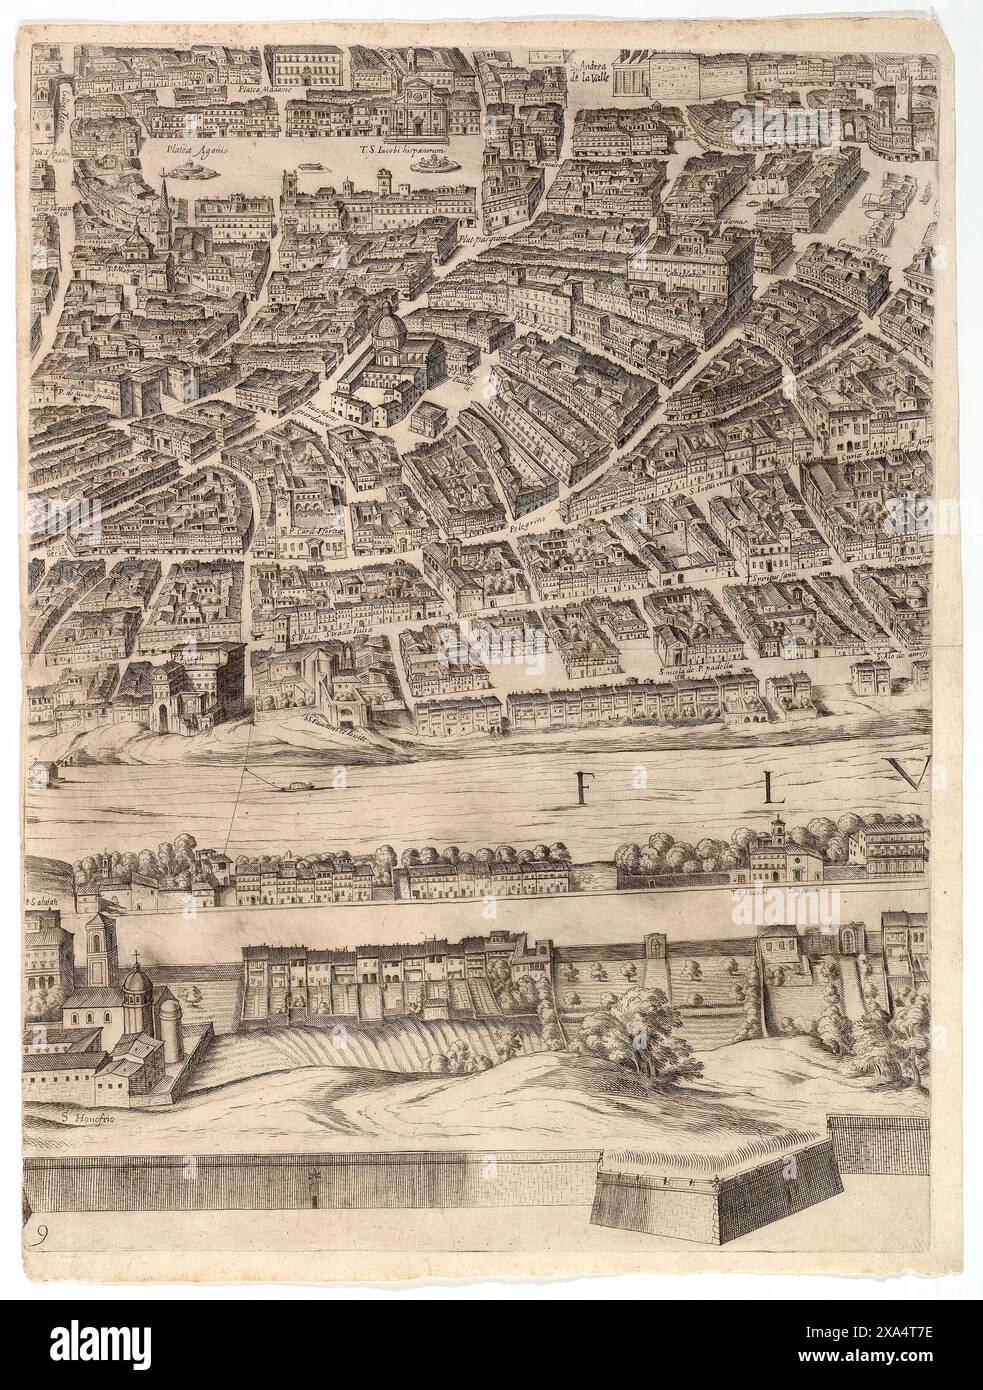 Plan of the City of Rome: Piazza Navona, the Campo di Fiore and the Sant' Onofrio by Antonio Tempesta  in 1645 Stock Photo